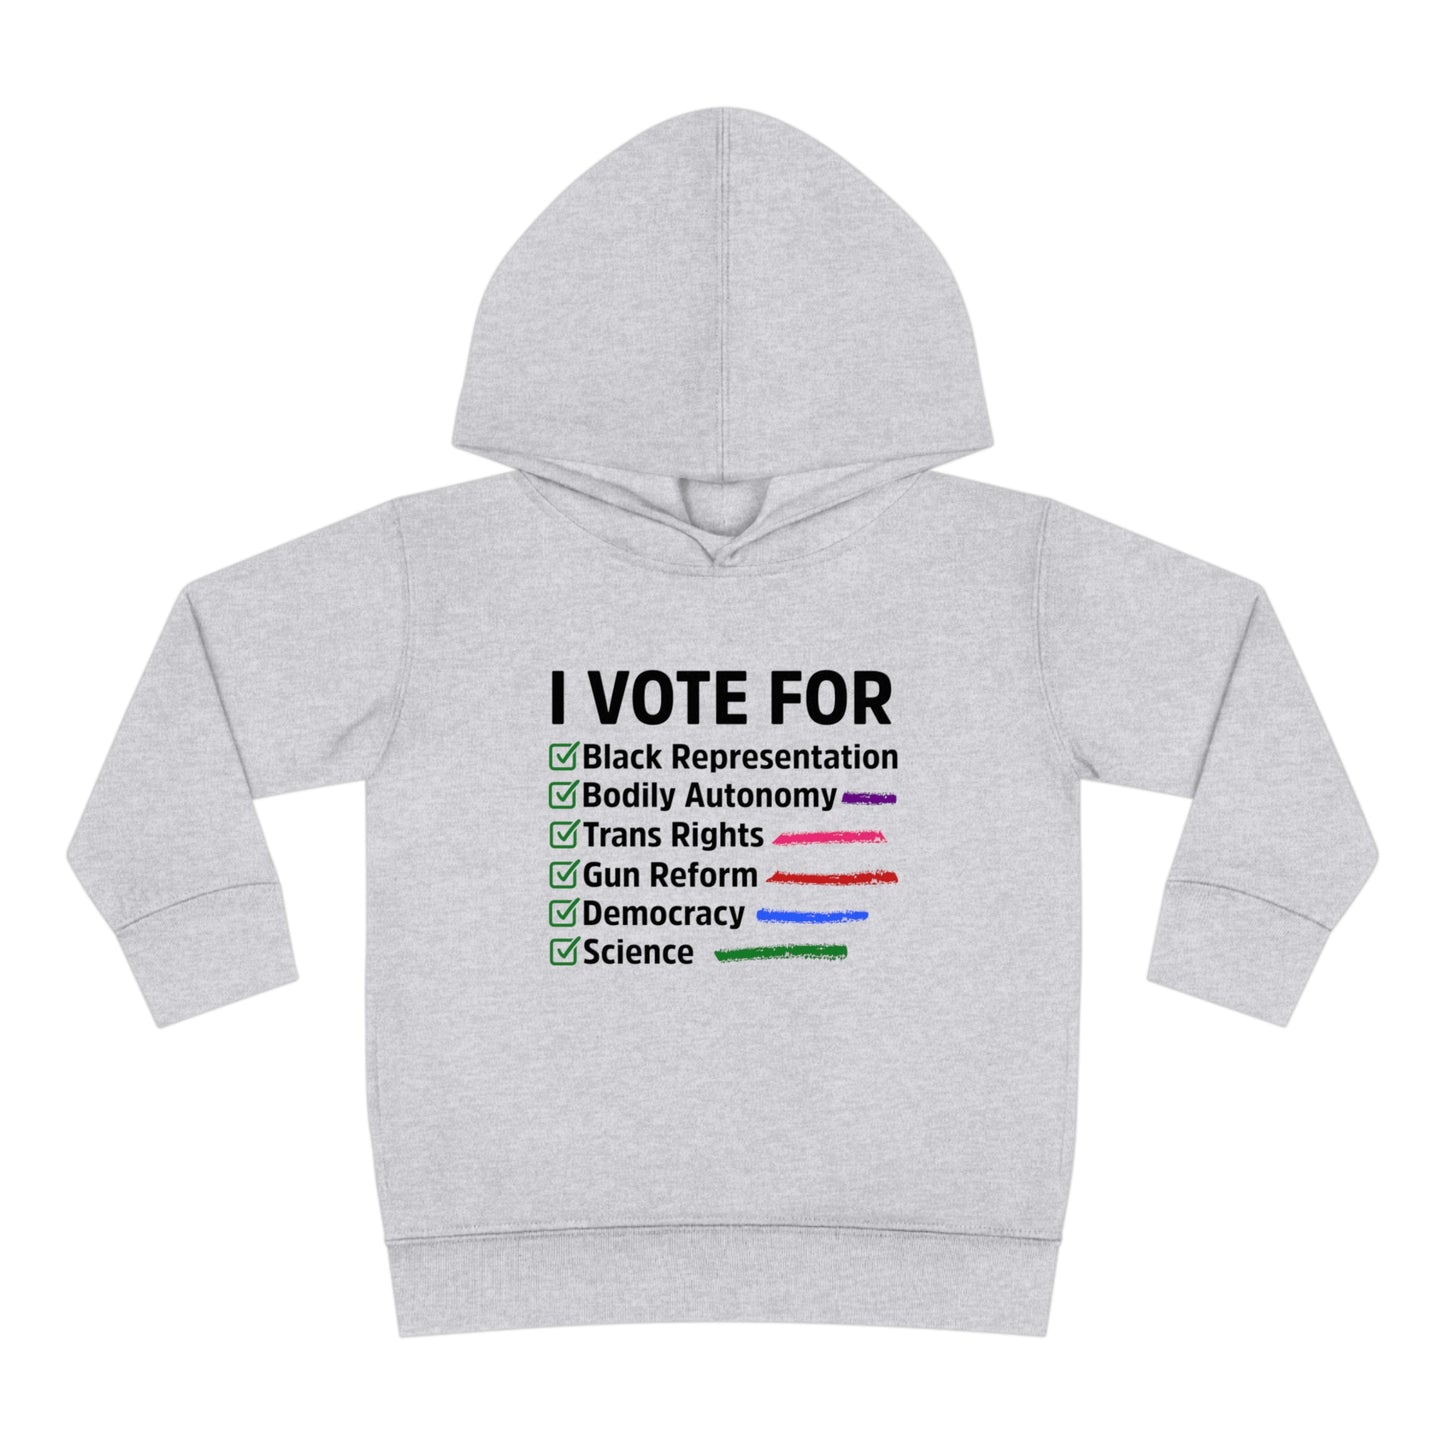 “I Vote For” Toddler Hoodie